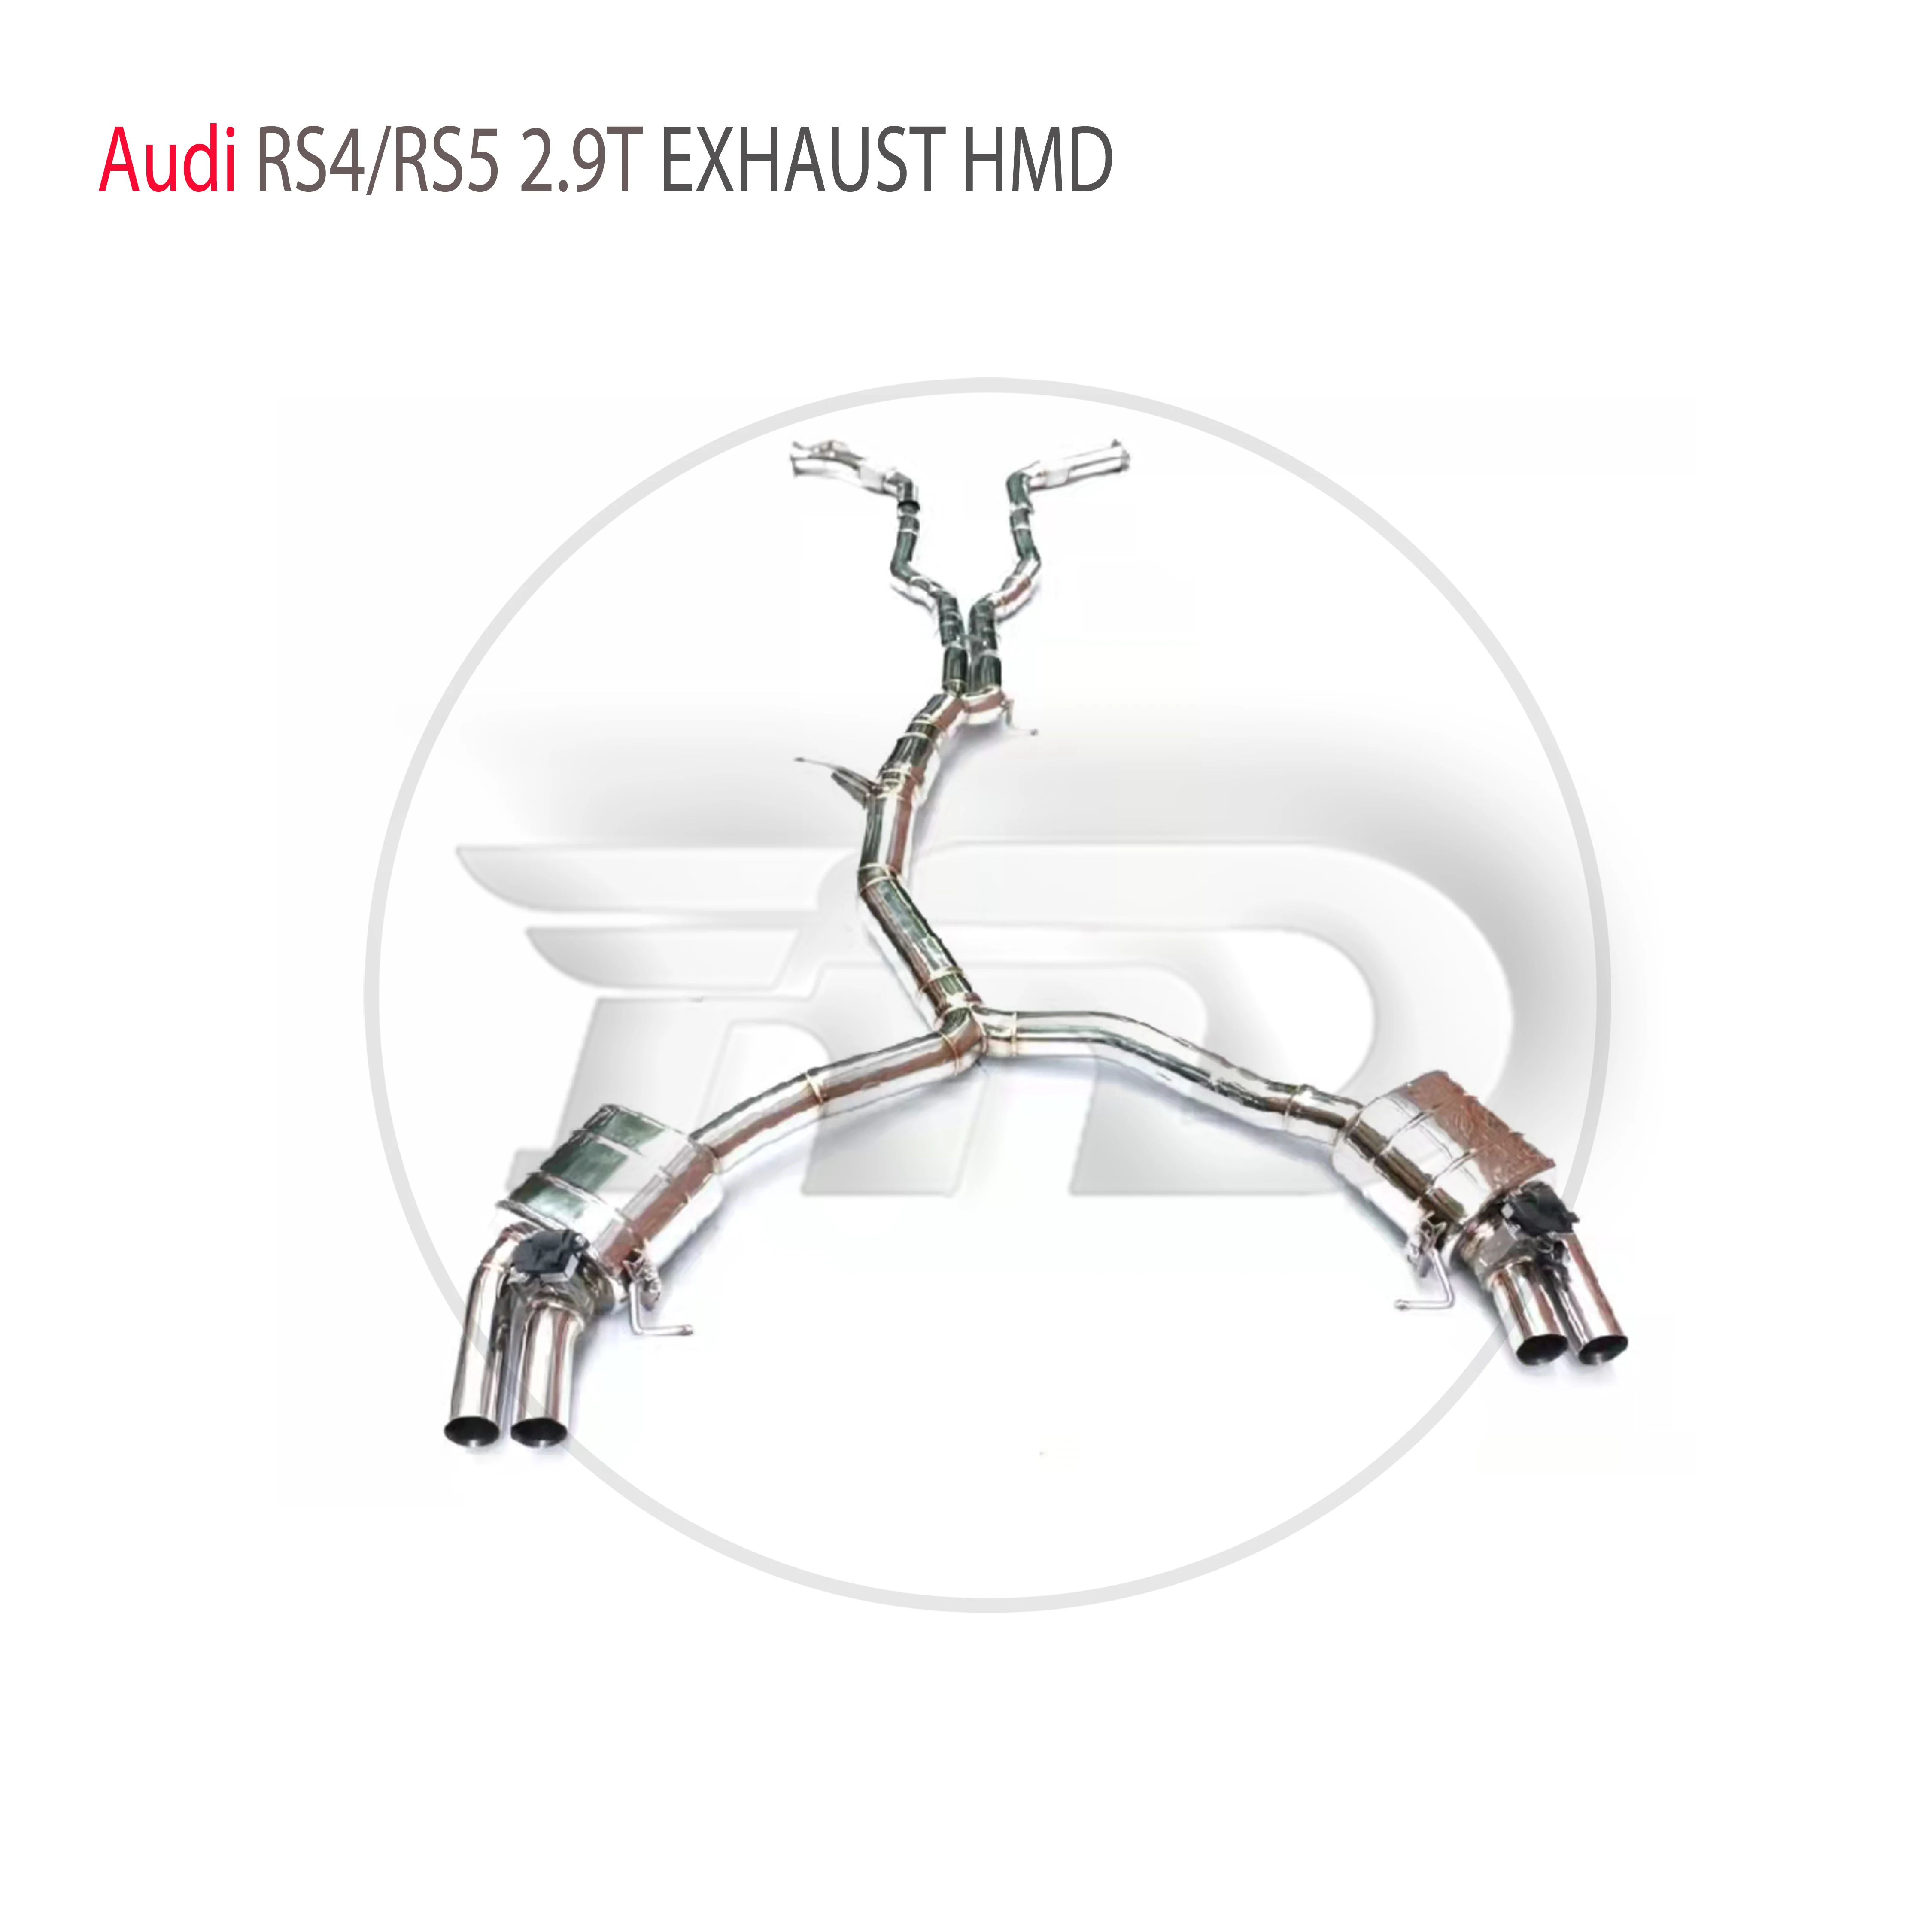 

HMD Stainless Steel Exhaust System Performance Catback Front Pipe for Audi RS4 RS5 2.9T Auto Accesorios Electronic Valve Muffler